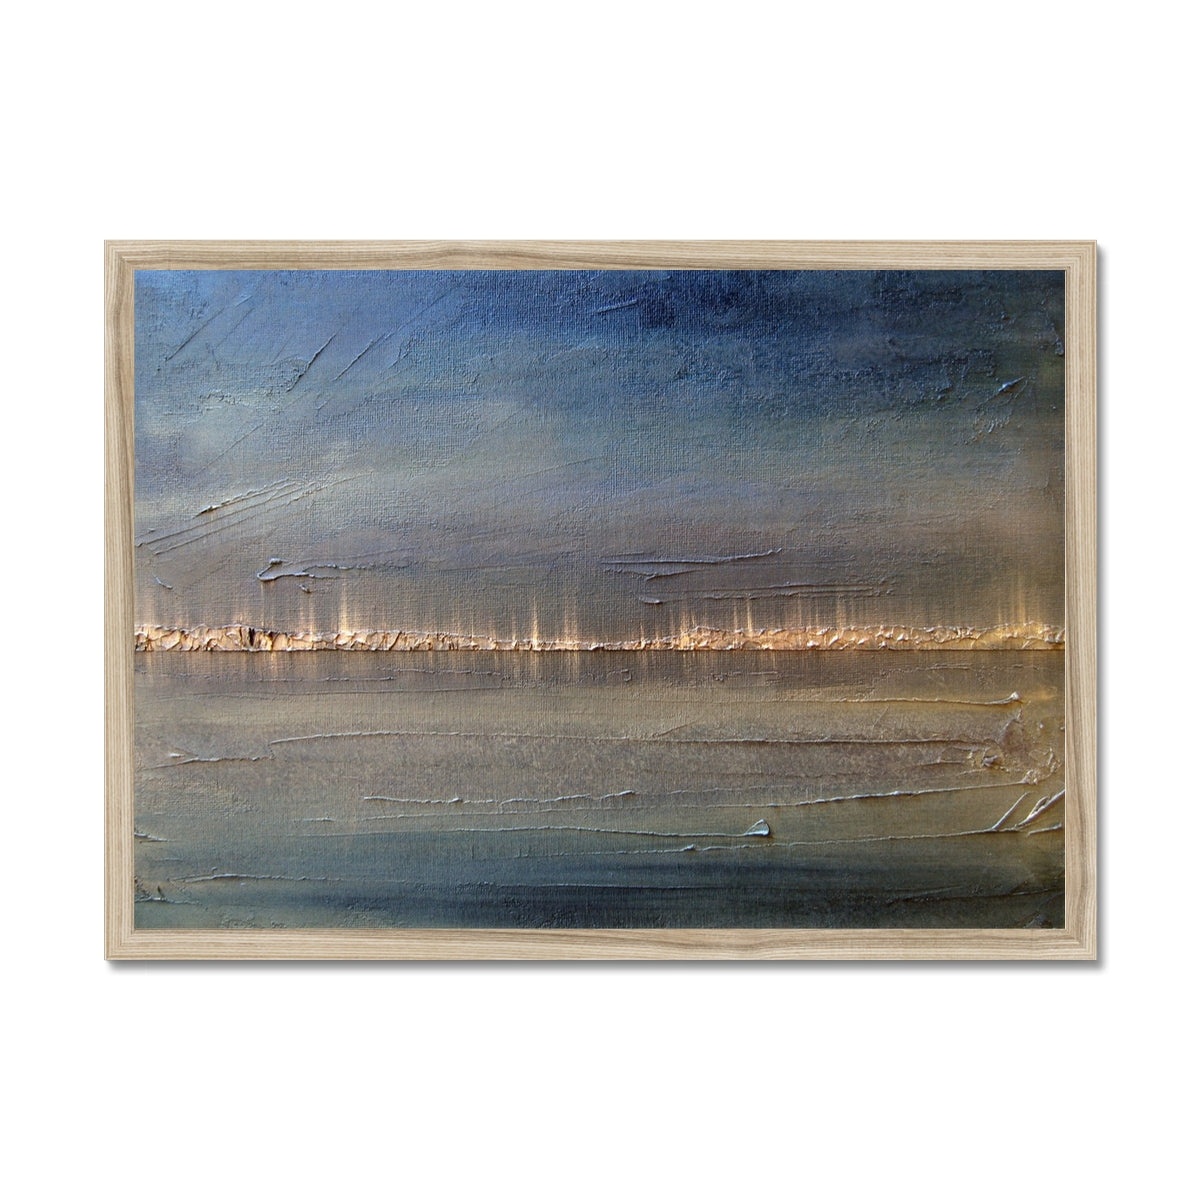 Distant Lights Lake Ontario Painting | Framed Prints From Scotland-Framed Prints-World Art Gallery-A2 Landscape-Natural Frame-Paintings, Prints, Homeware, Art Gifts From Scotland By Scottish Artist Kevin Hunter